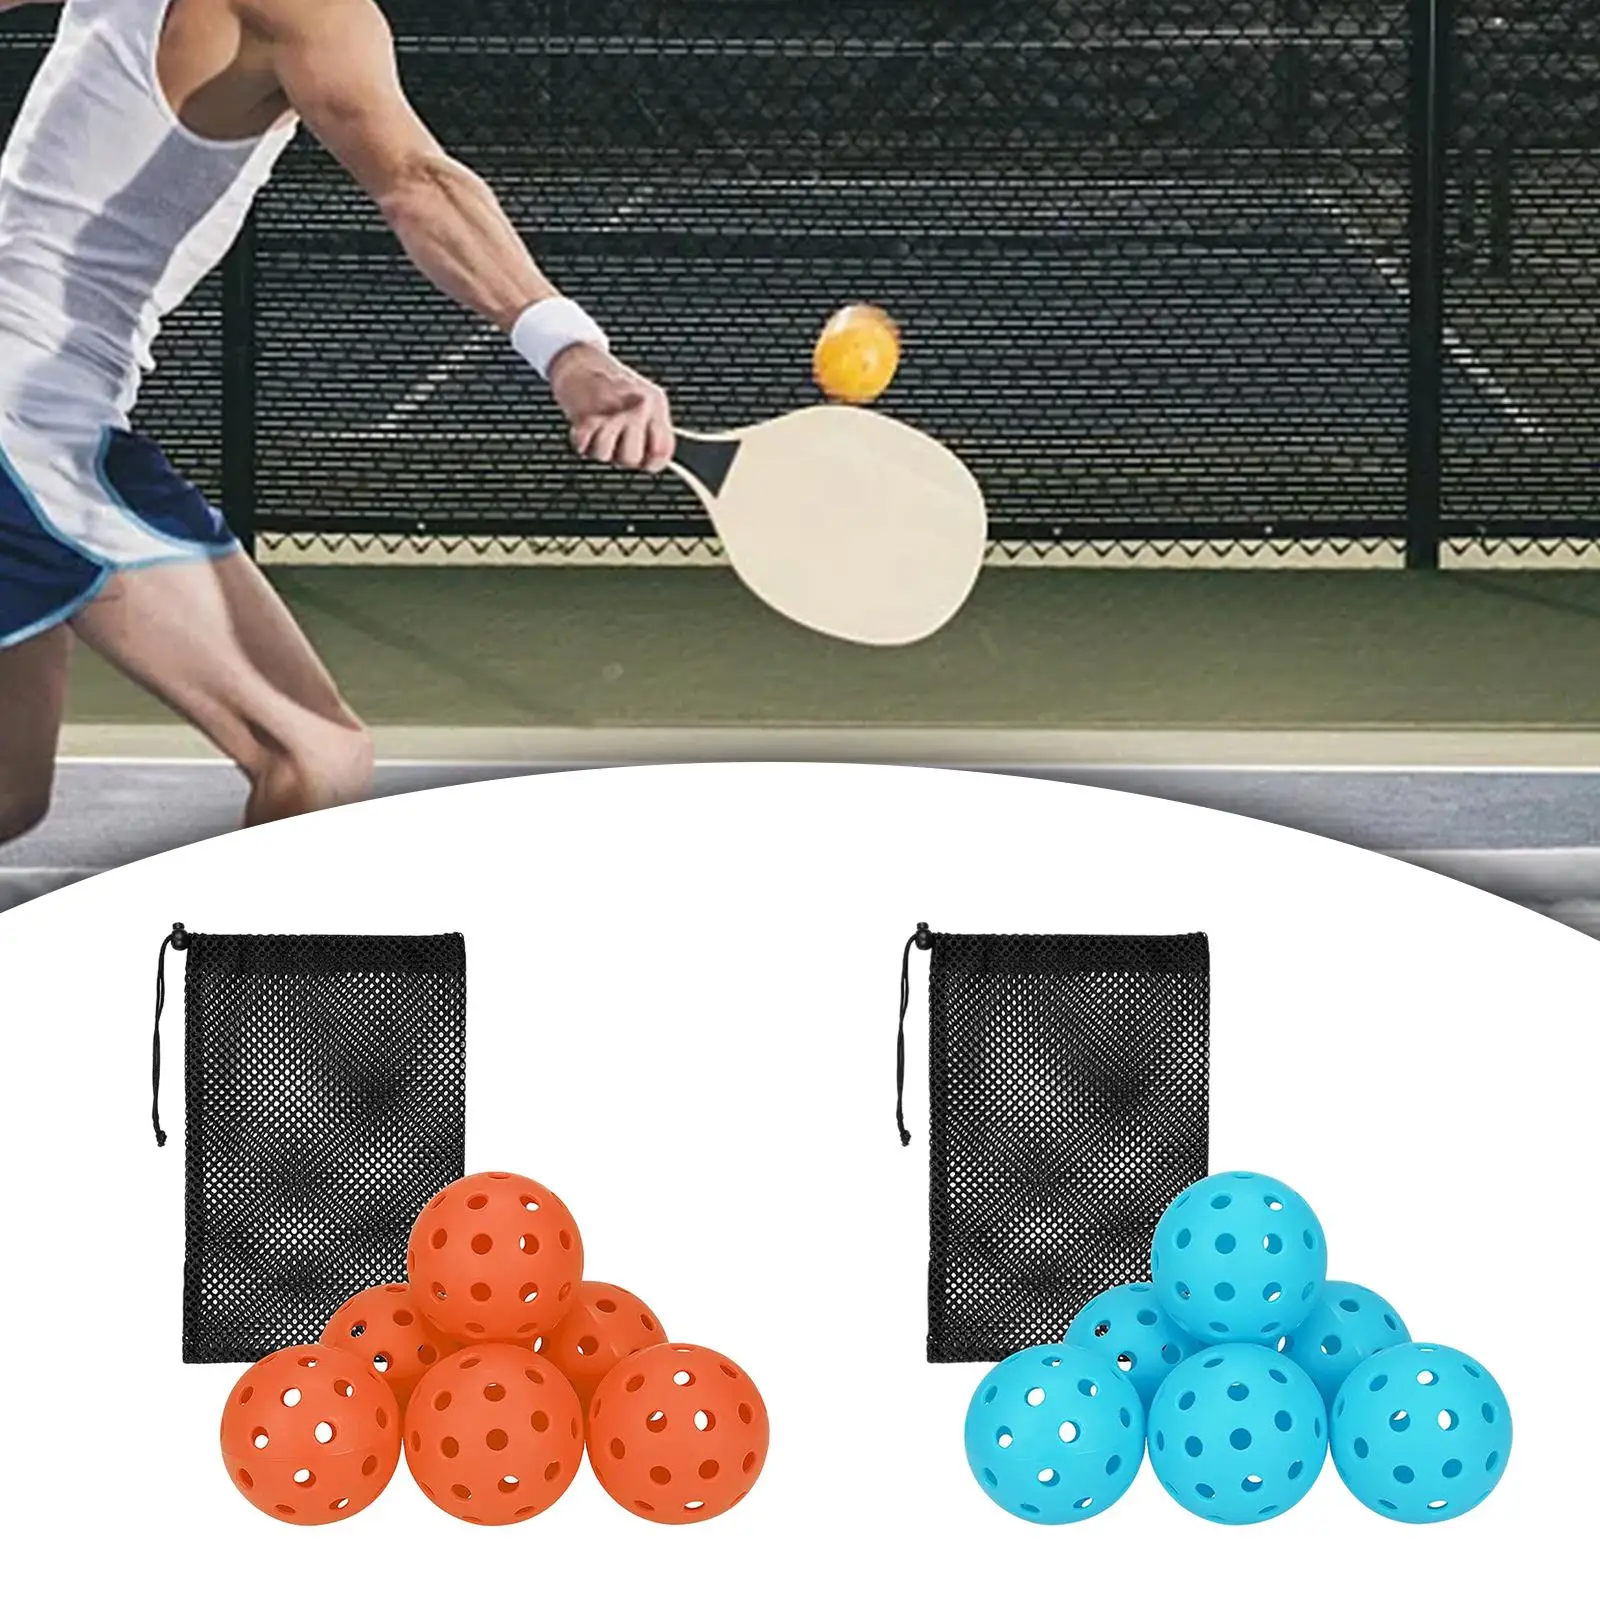 6x Pickleball Balls Professional Pickle Balls for Training Practice Outdoor